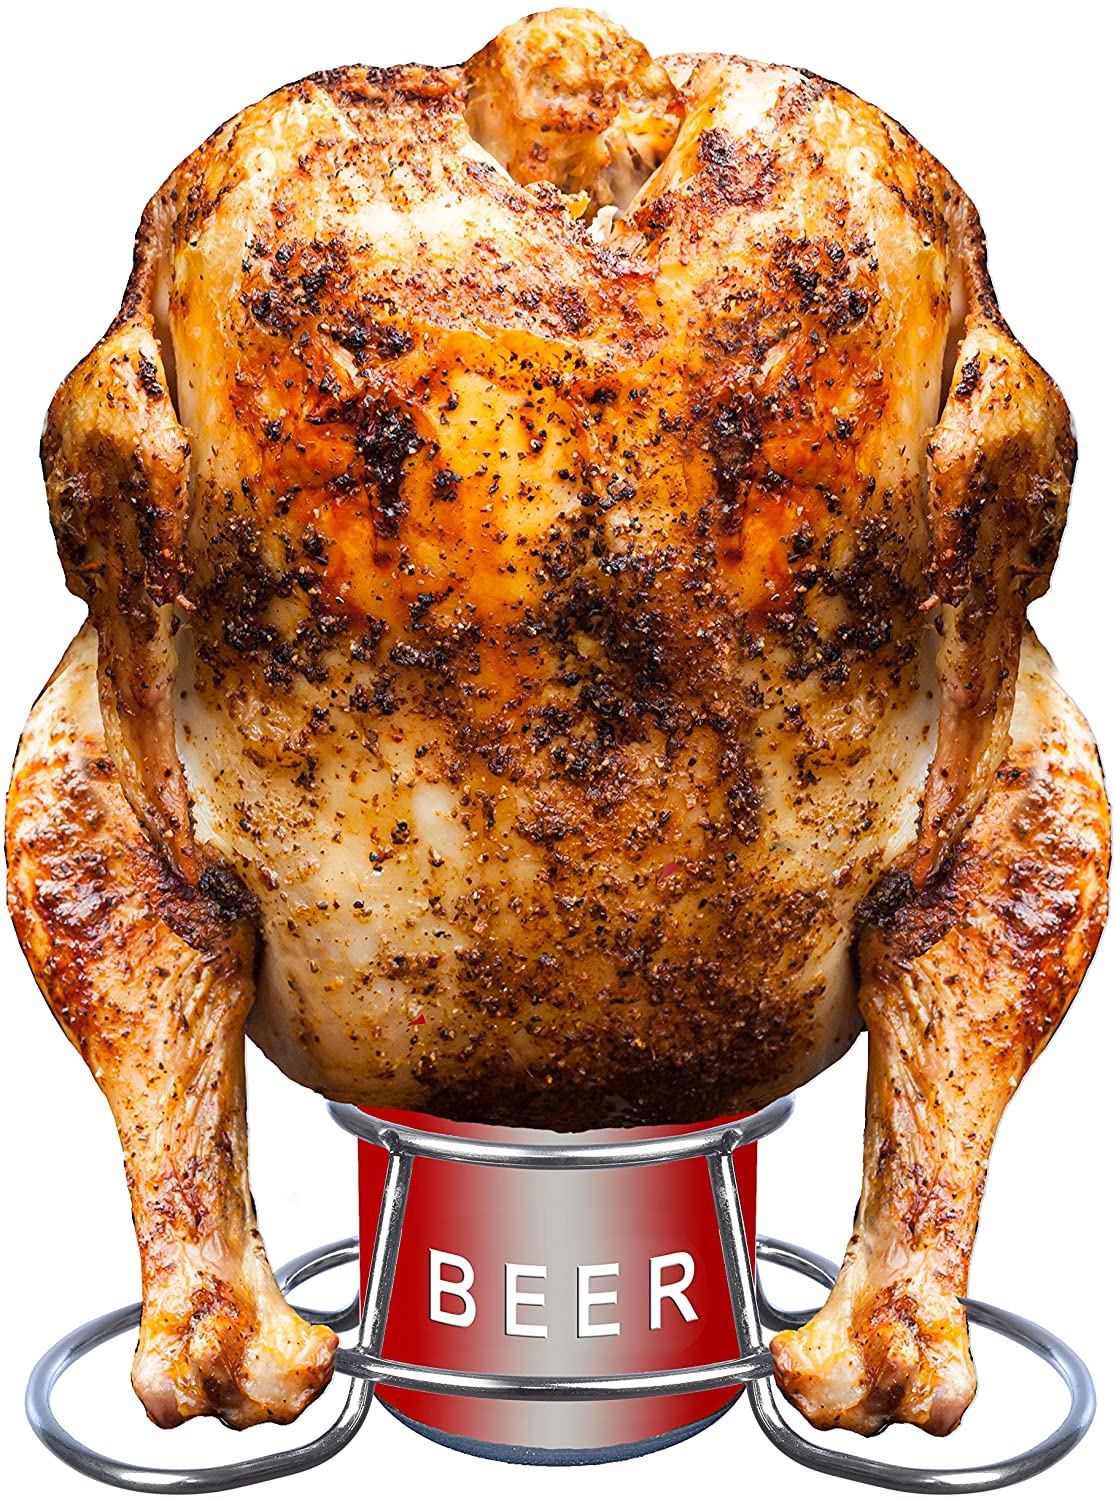 Premium Grade Stainless Steel Beer Chicken Stand with Handle Koohere Beer Can Chicken Holder for Grill and Smoker 